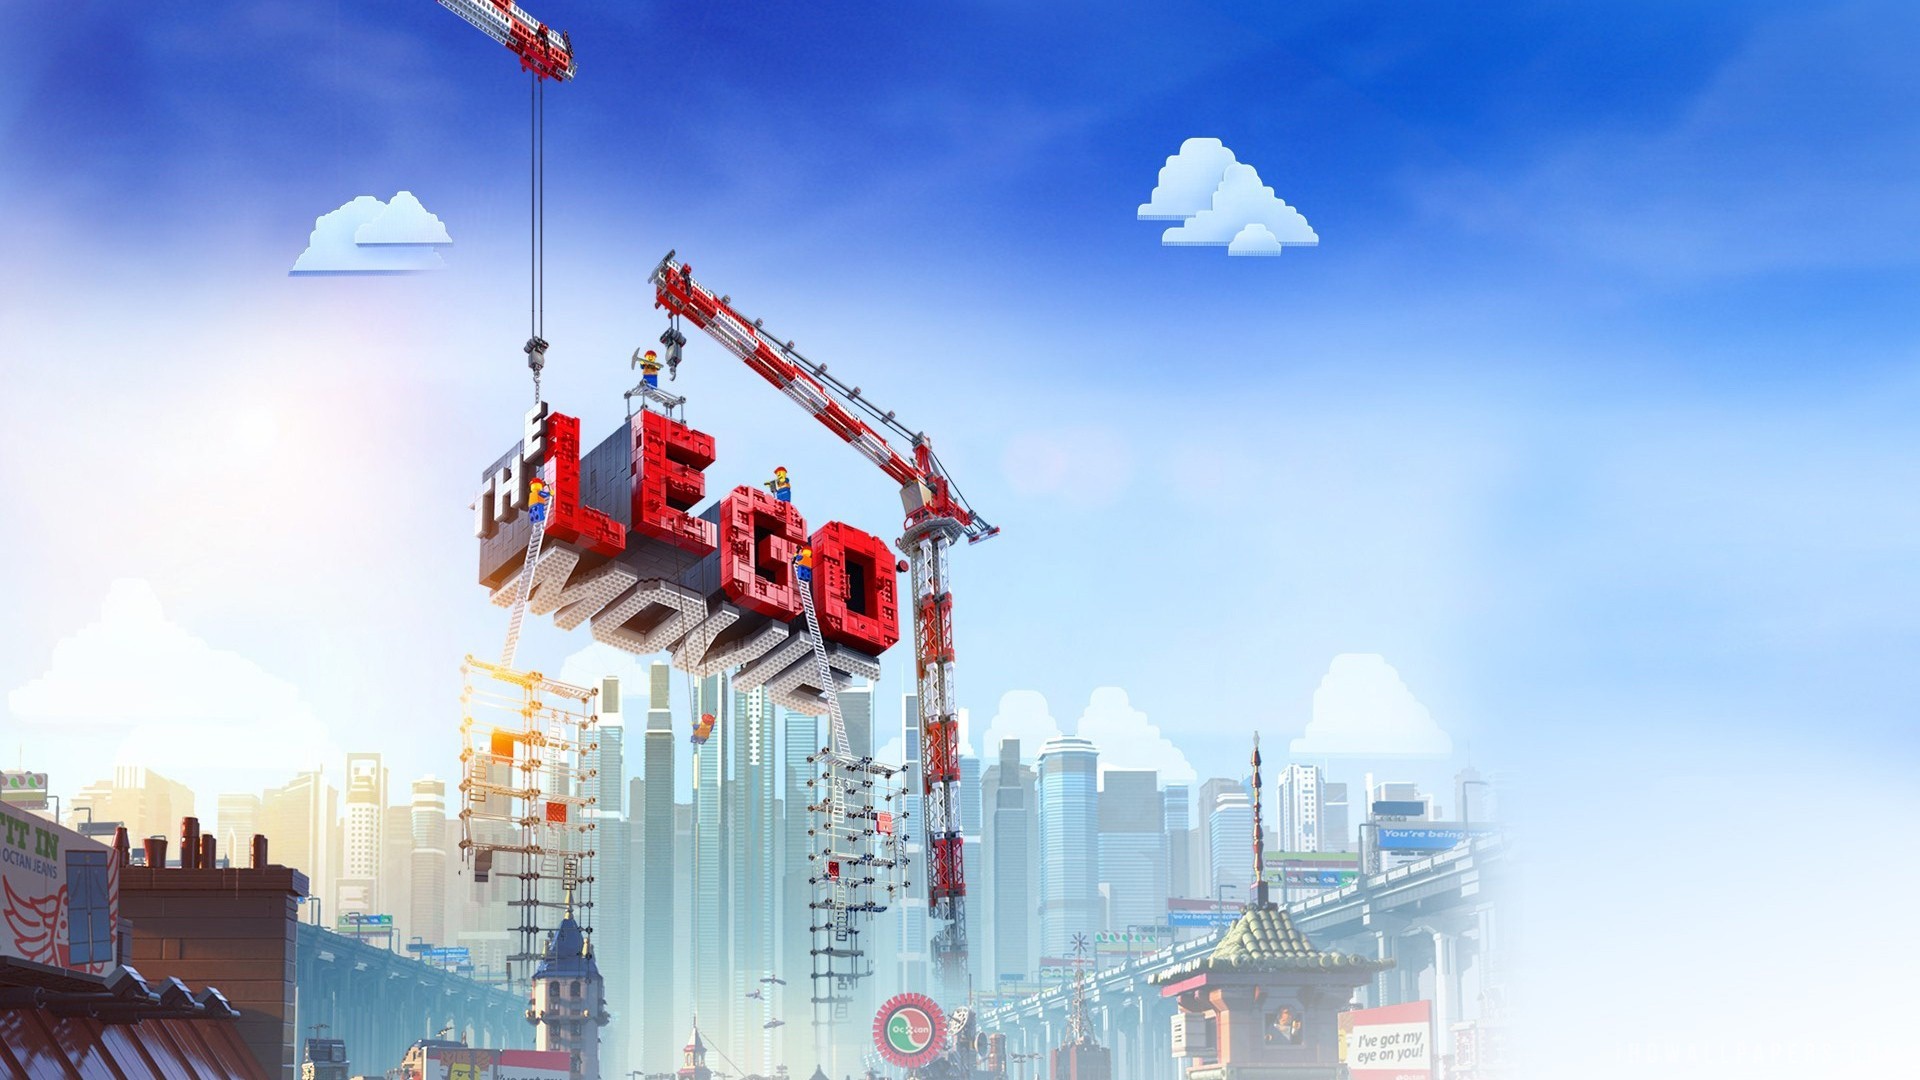 1920x1080 115 The Lego Movie HD Wallpapers | Backgrounds - Wallpaper Abyss - Page 2